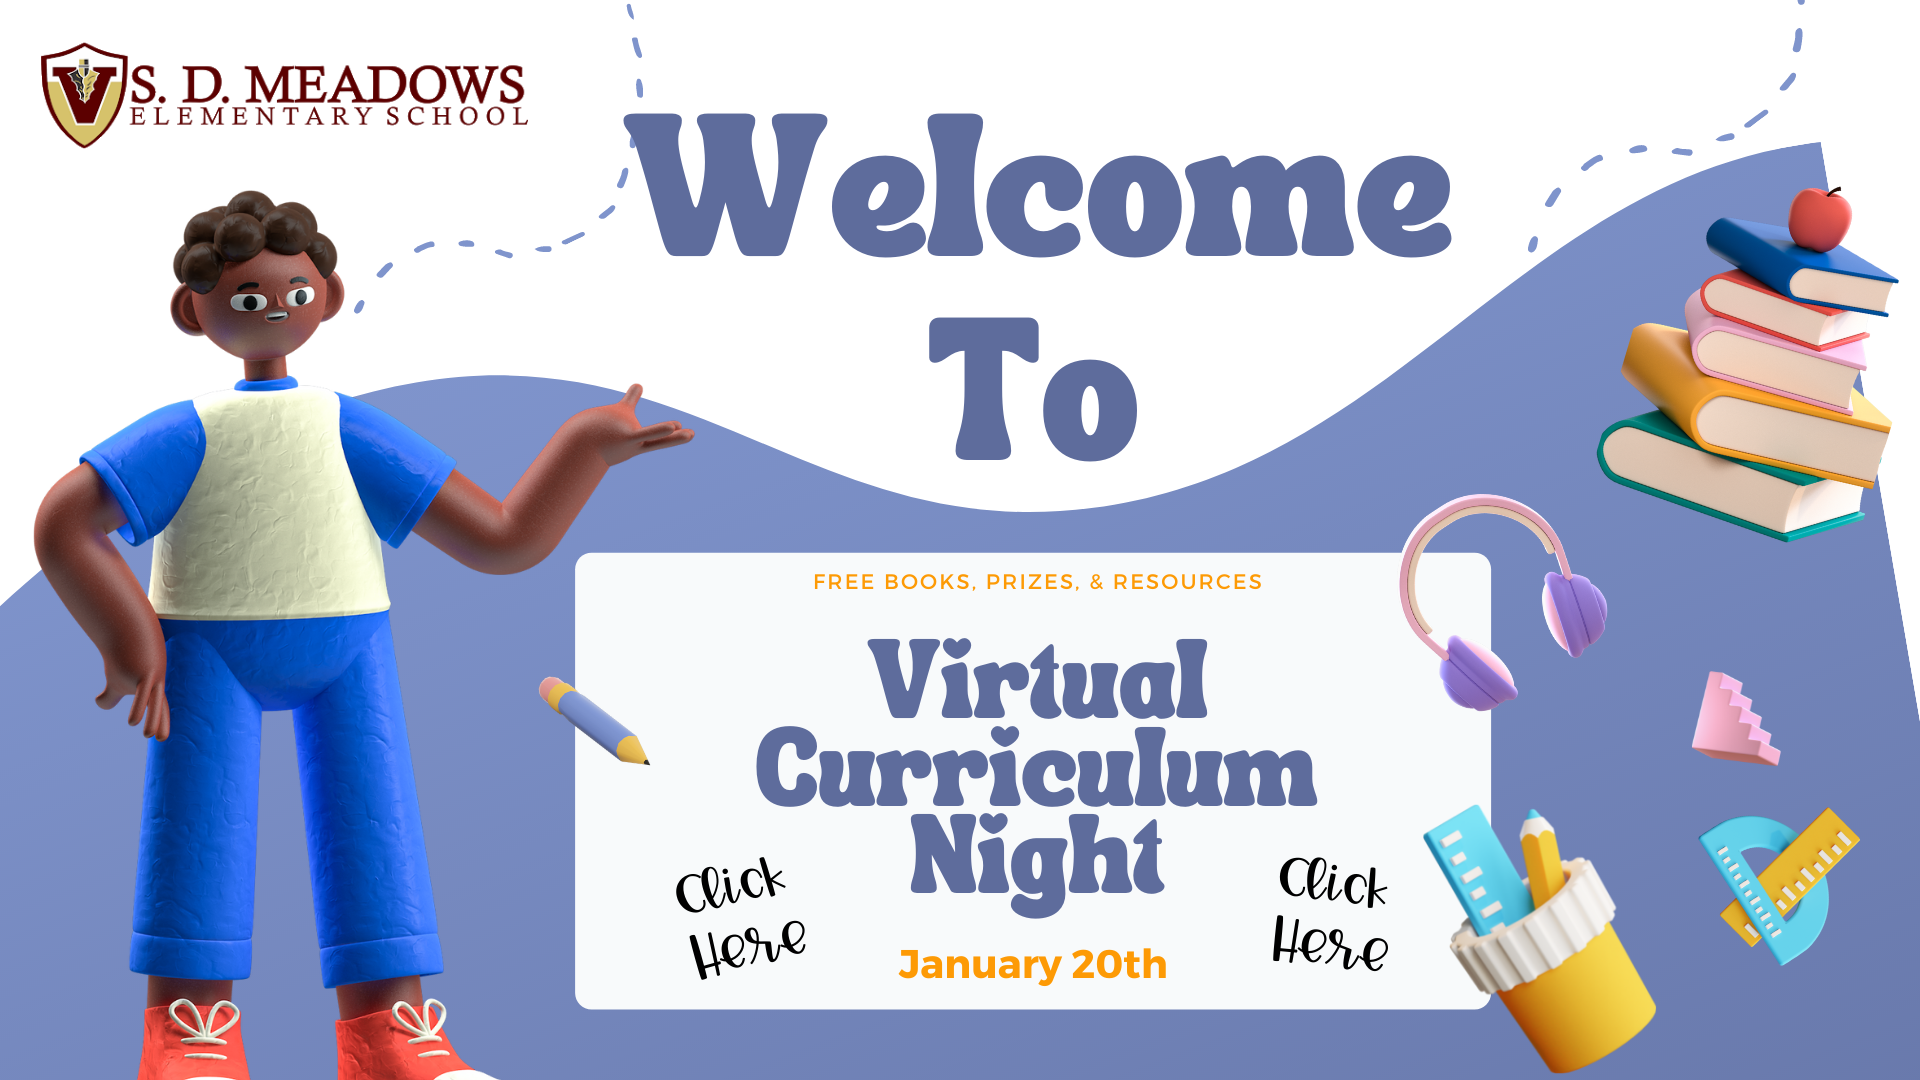 Welcome to Virtual Curriculum Night